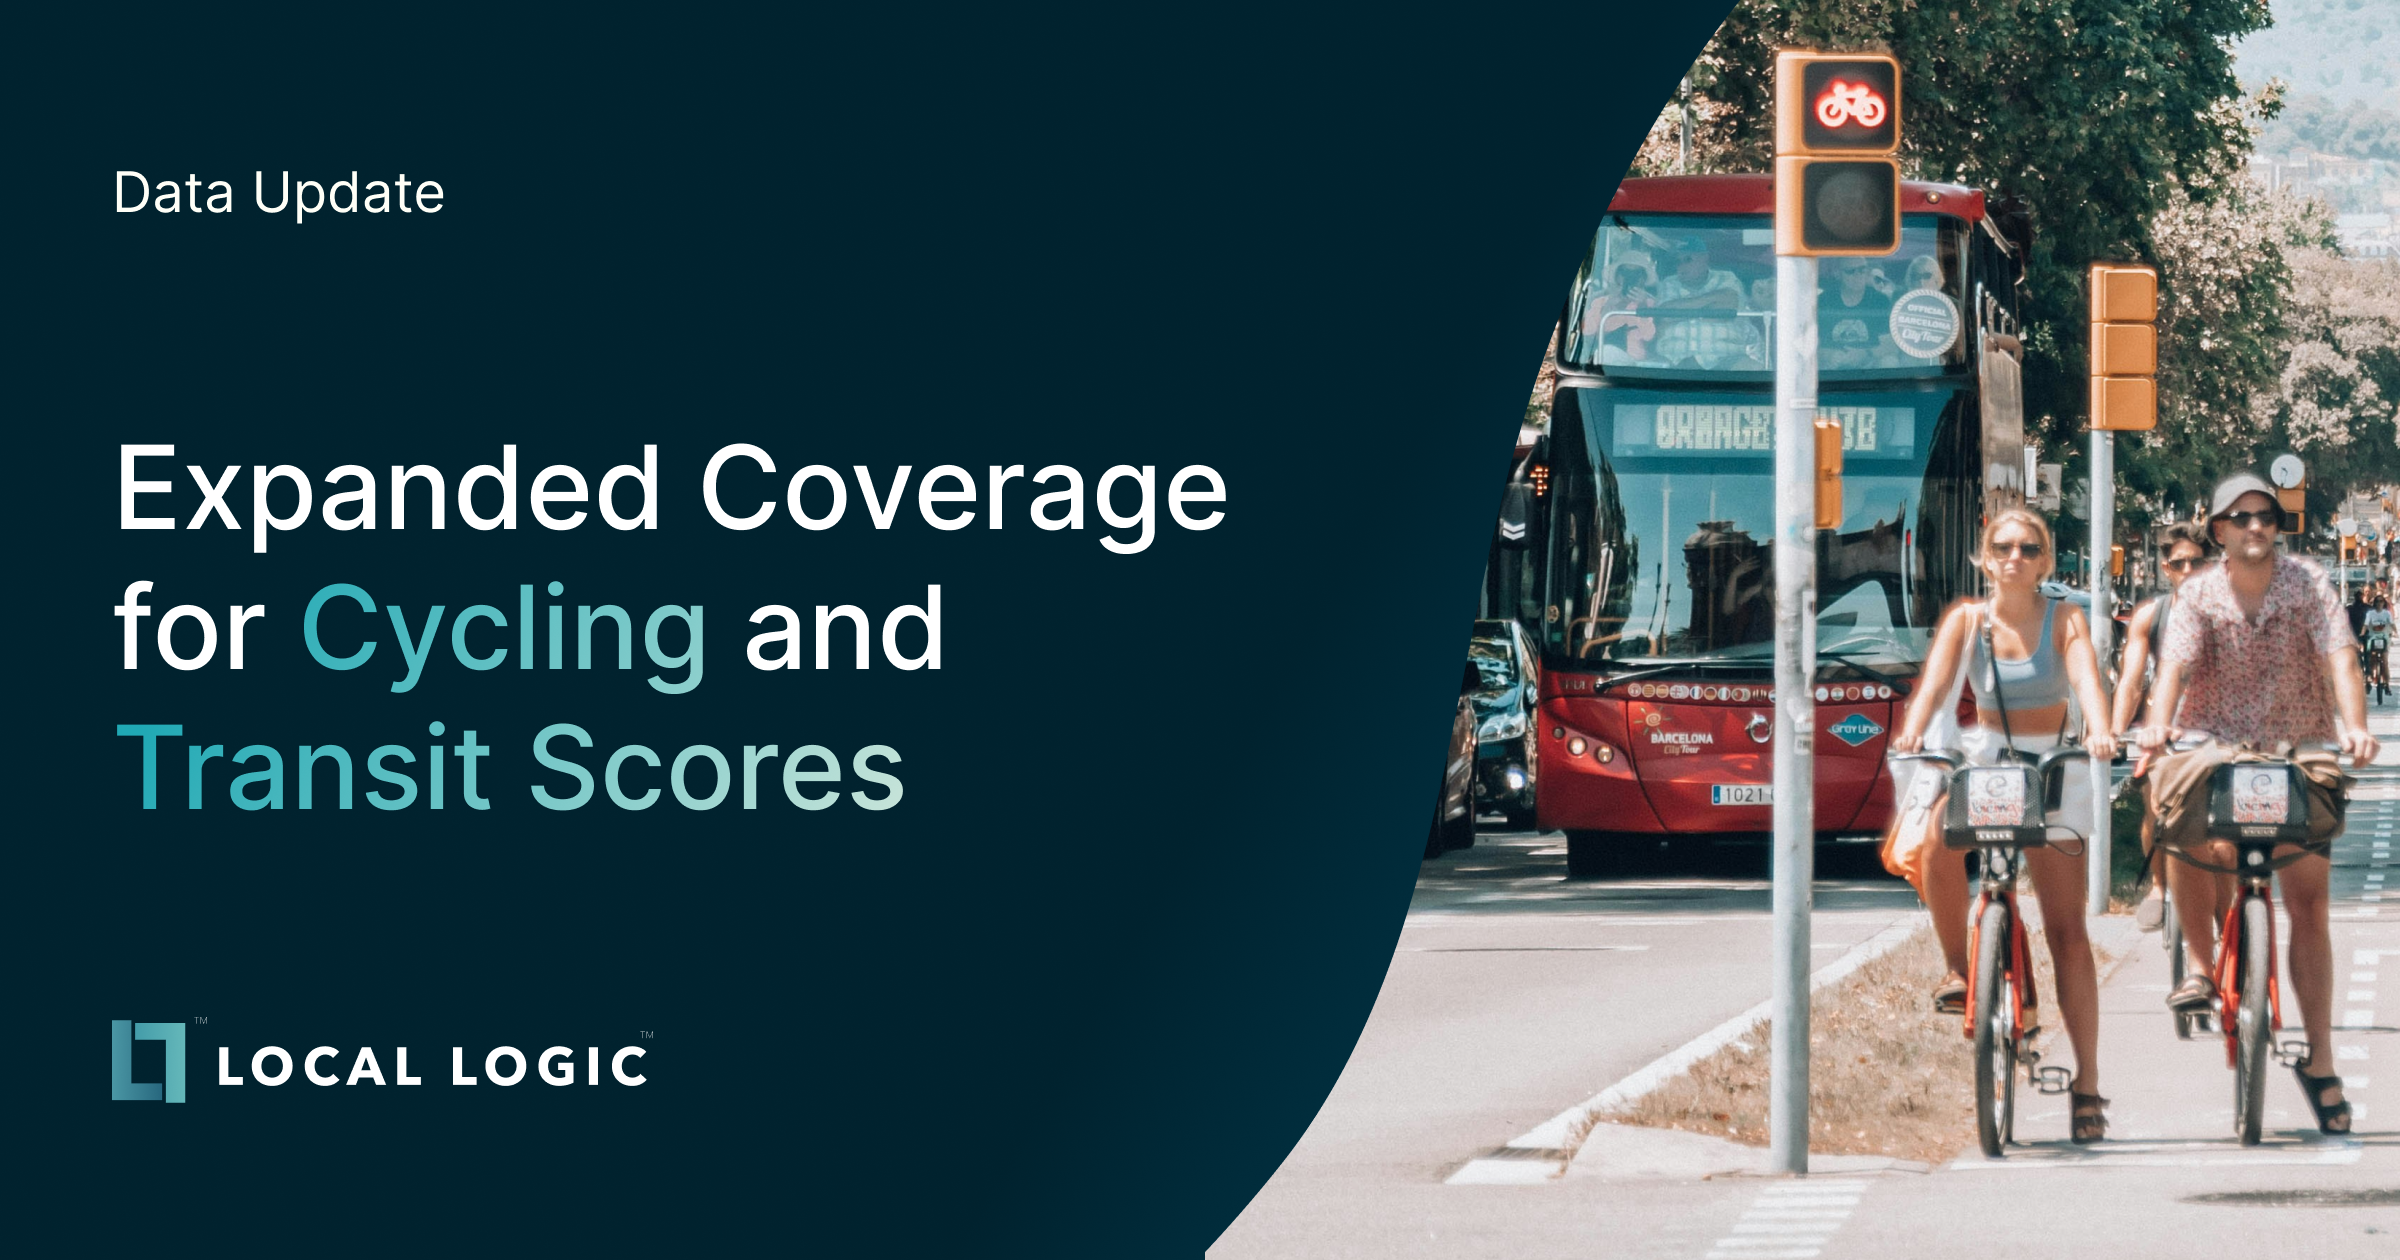 Promotion visual announcing data update featuring text that says "Expanded Coverage for Cycling and Transit Scores" on top of Local Logic's logo. Next to it is a photo of people cycling in a bike lane next to a parked bus